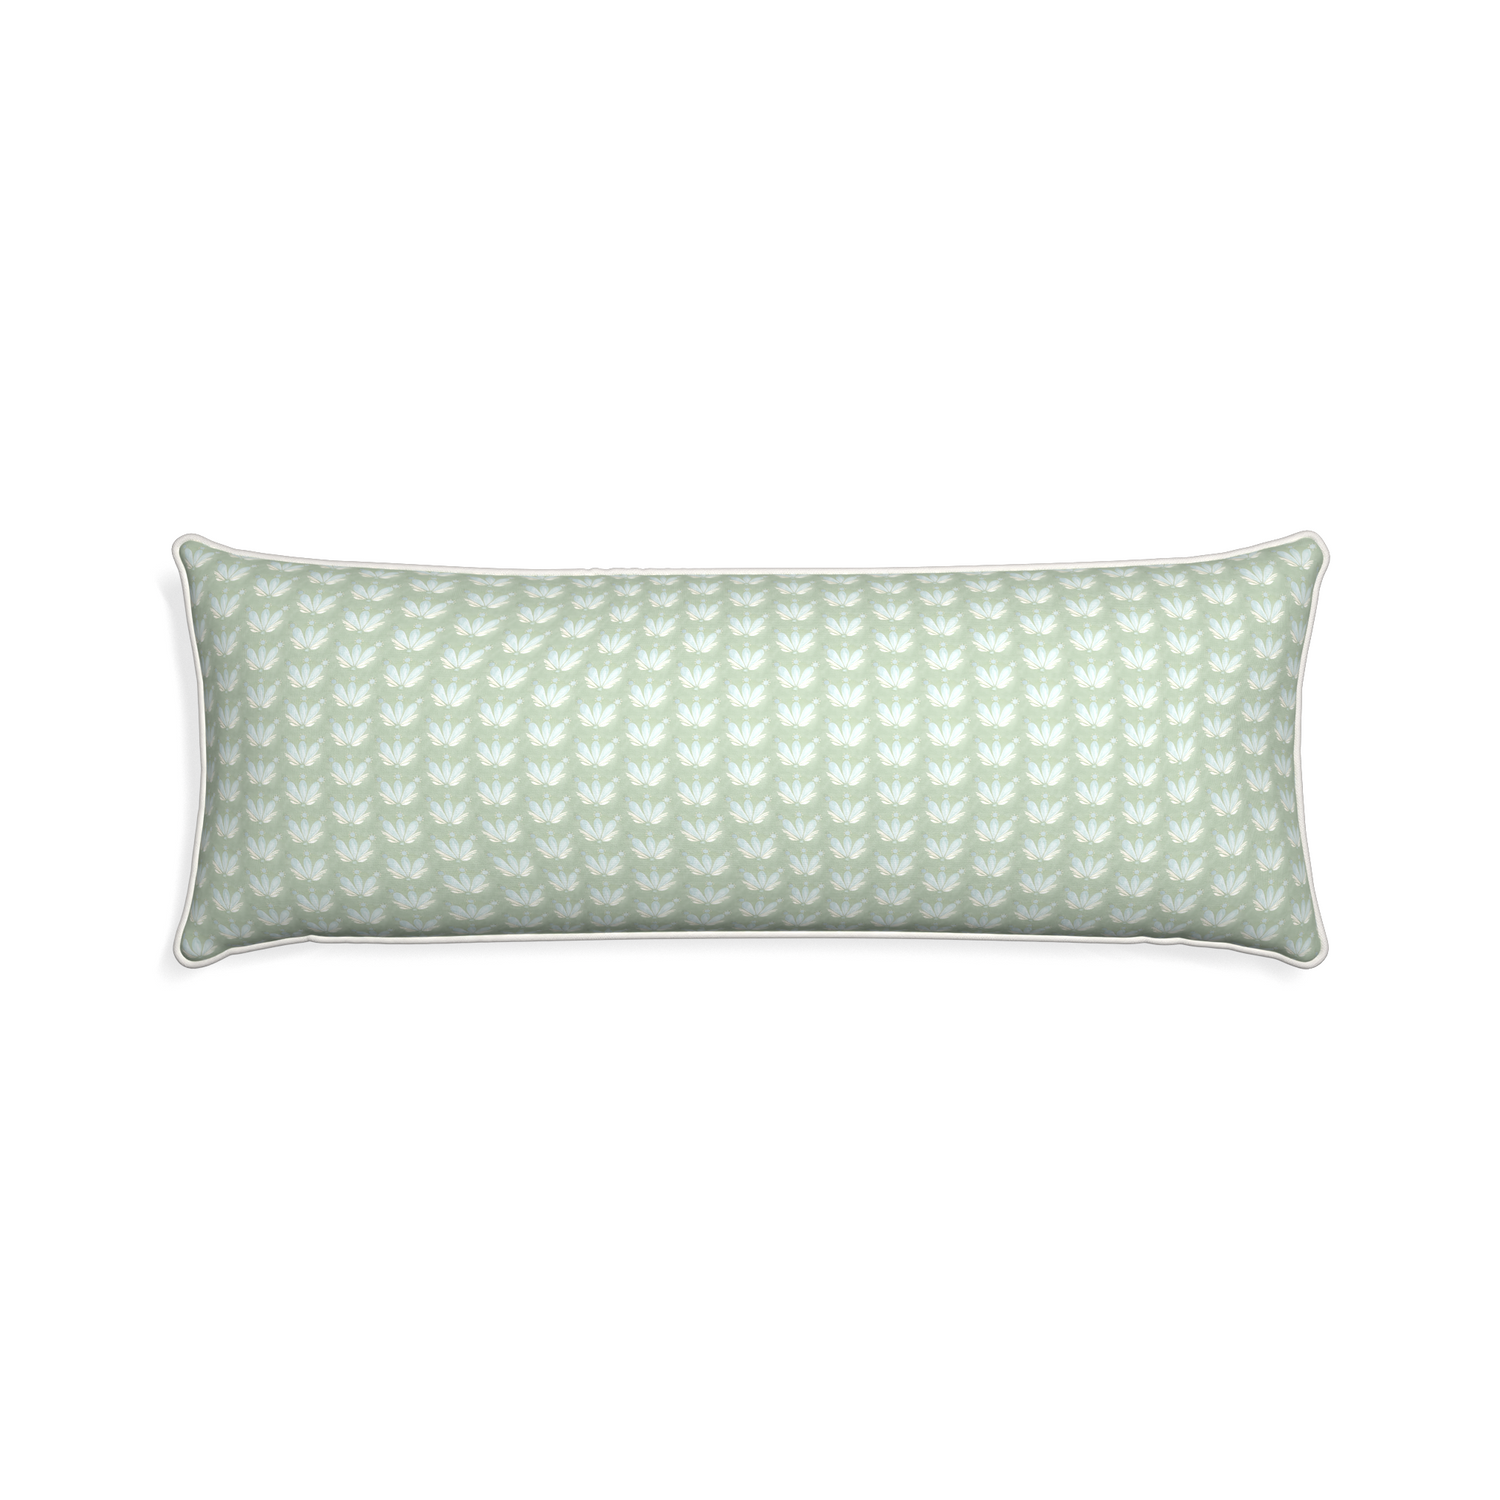 Xl-lumbar serena sea salt custom blue & green floral drop repeatpillow with snow piping on white background